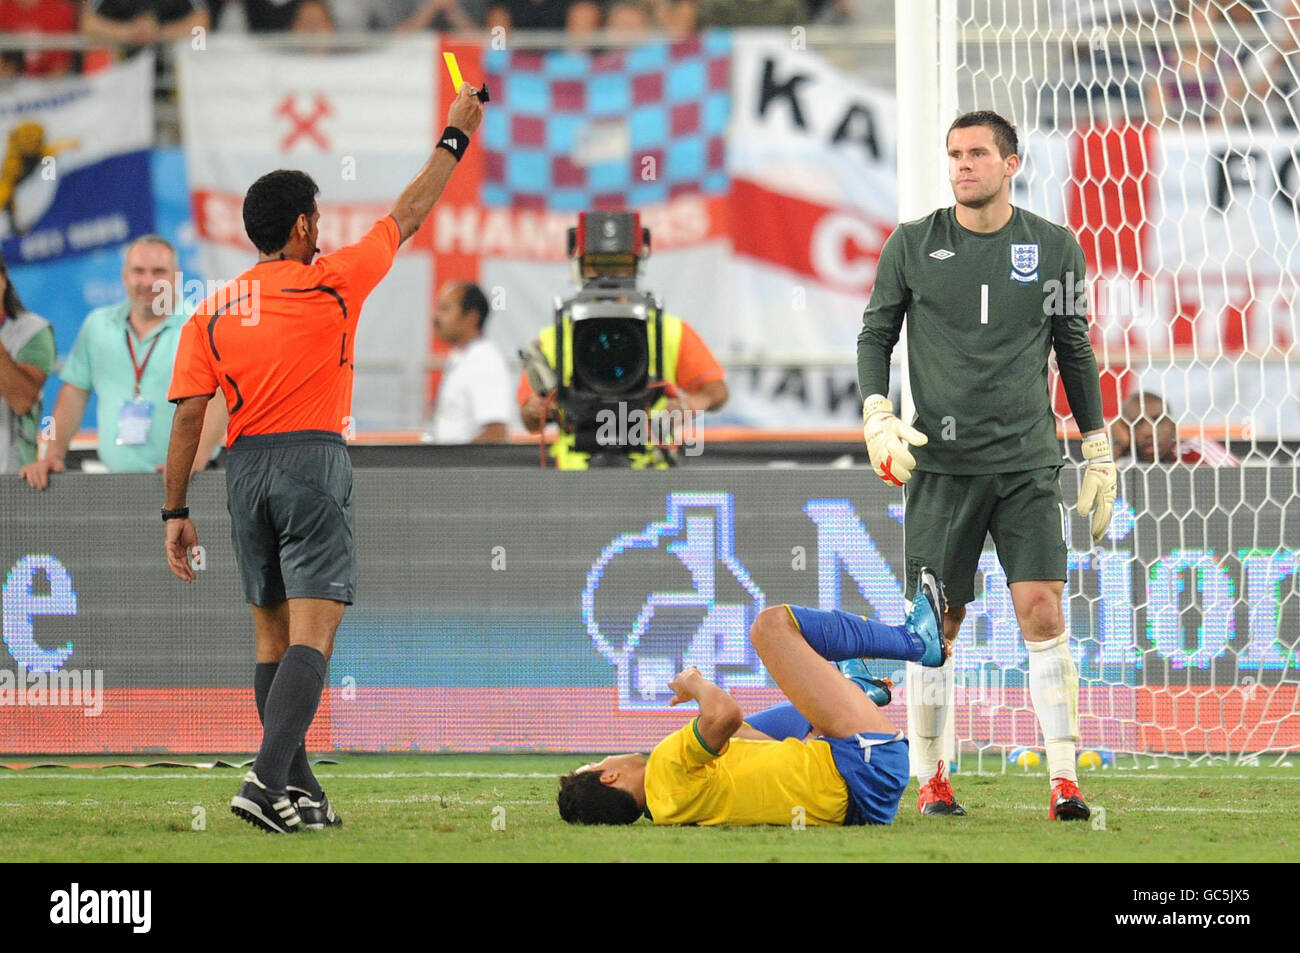 England goal keeper Ben Foster receives a yellow card for a tackle on Brazil's Honorato da Silva Nilmar (floor), and resulted in a missed penalty kick by Clemente Luis Fabiano during the International Friendly at the Khalifa International Stadium, Doha, Qatar. Stock Photo